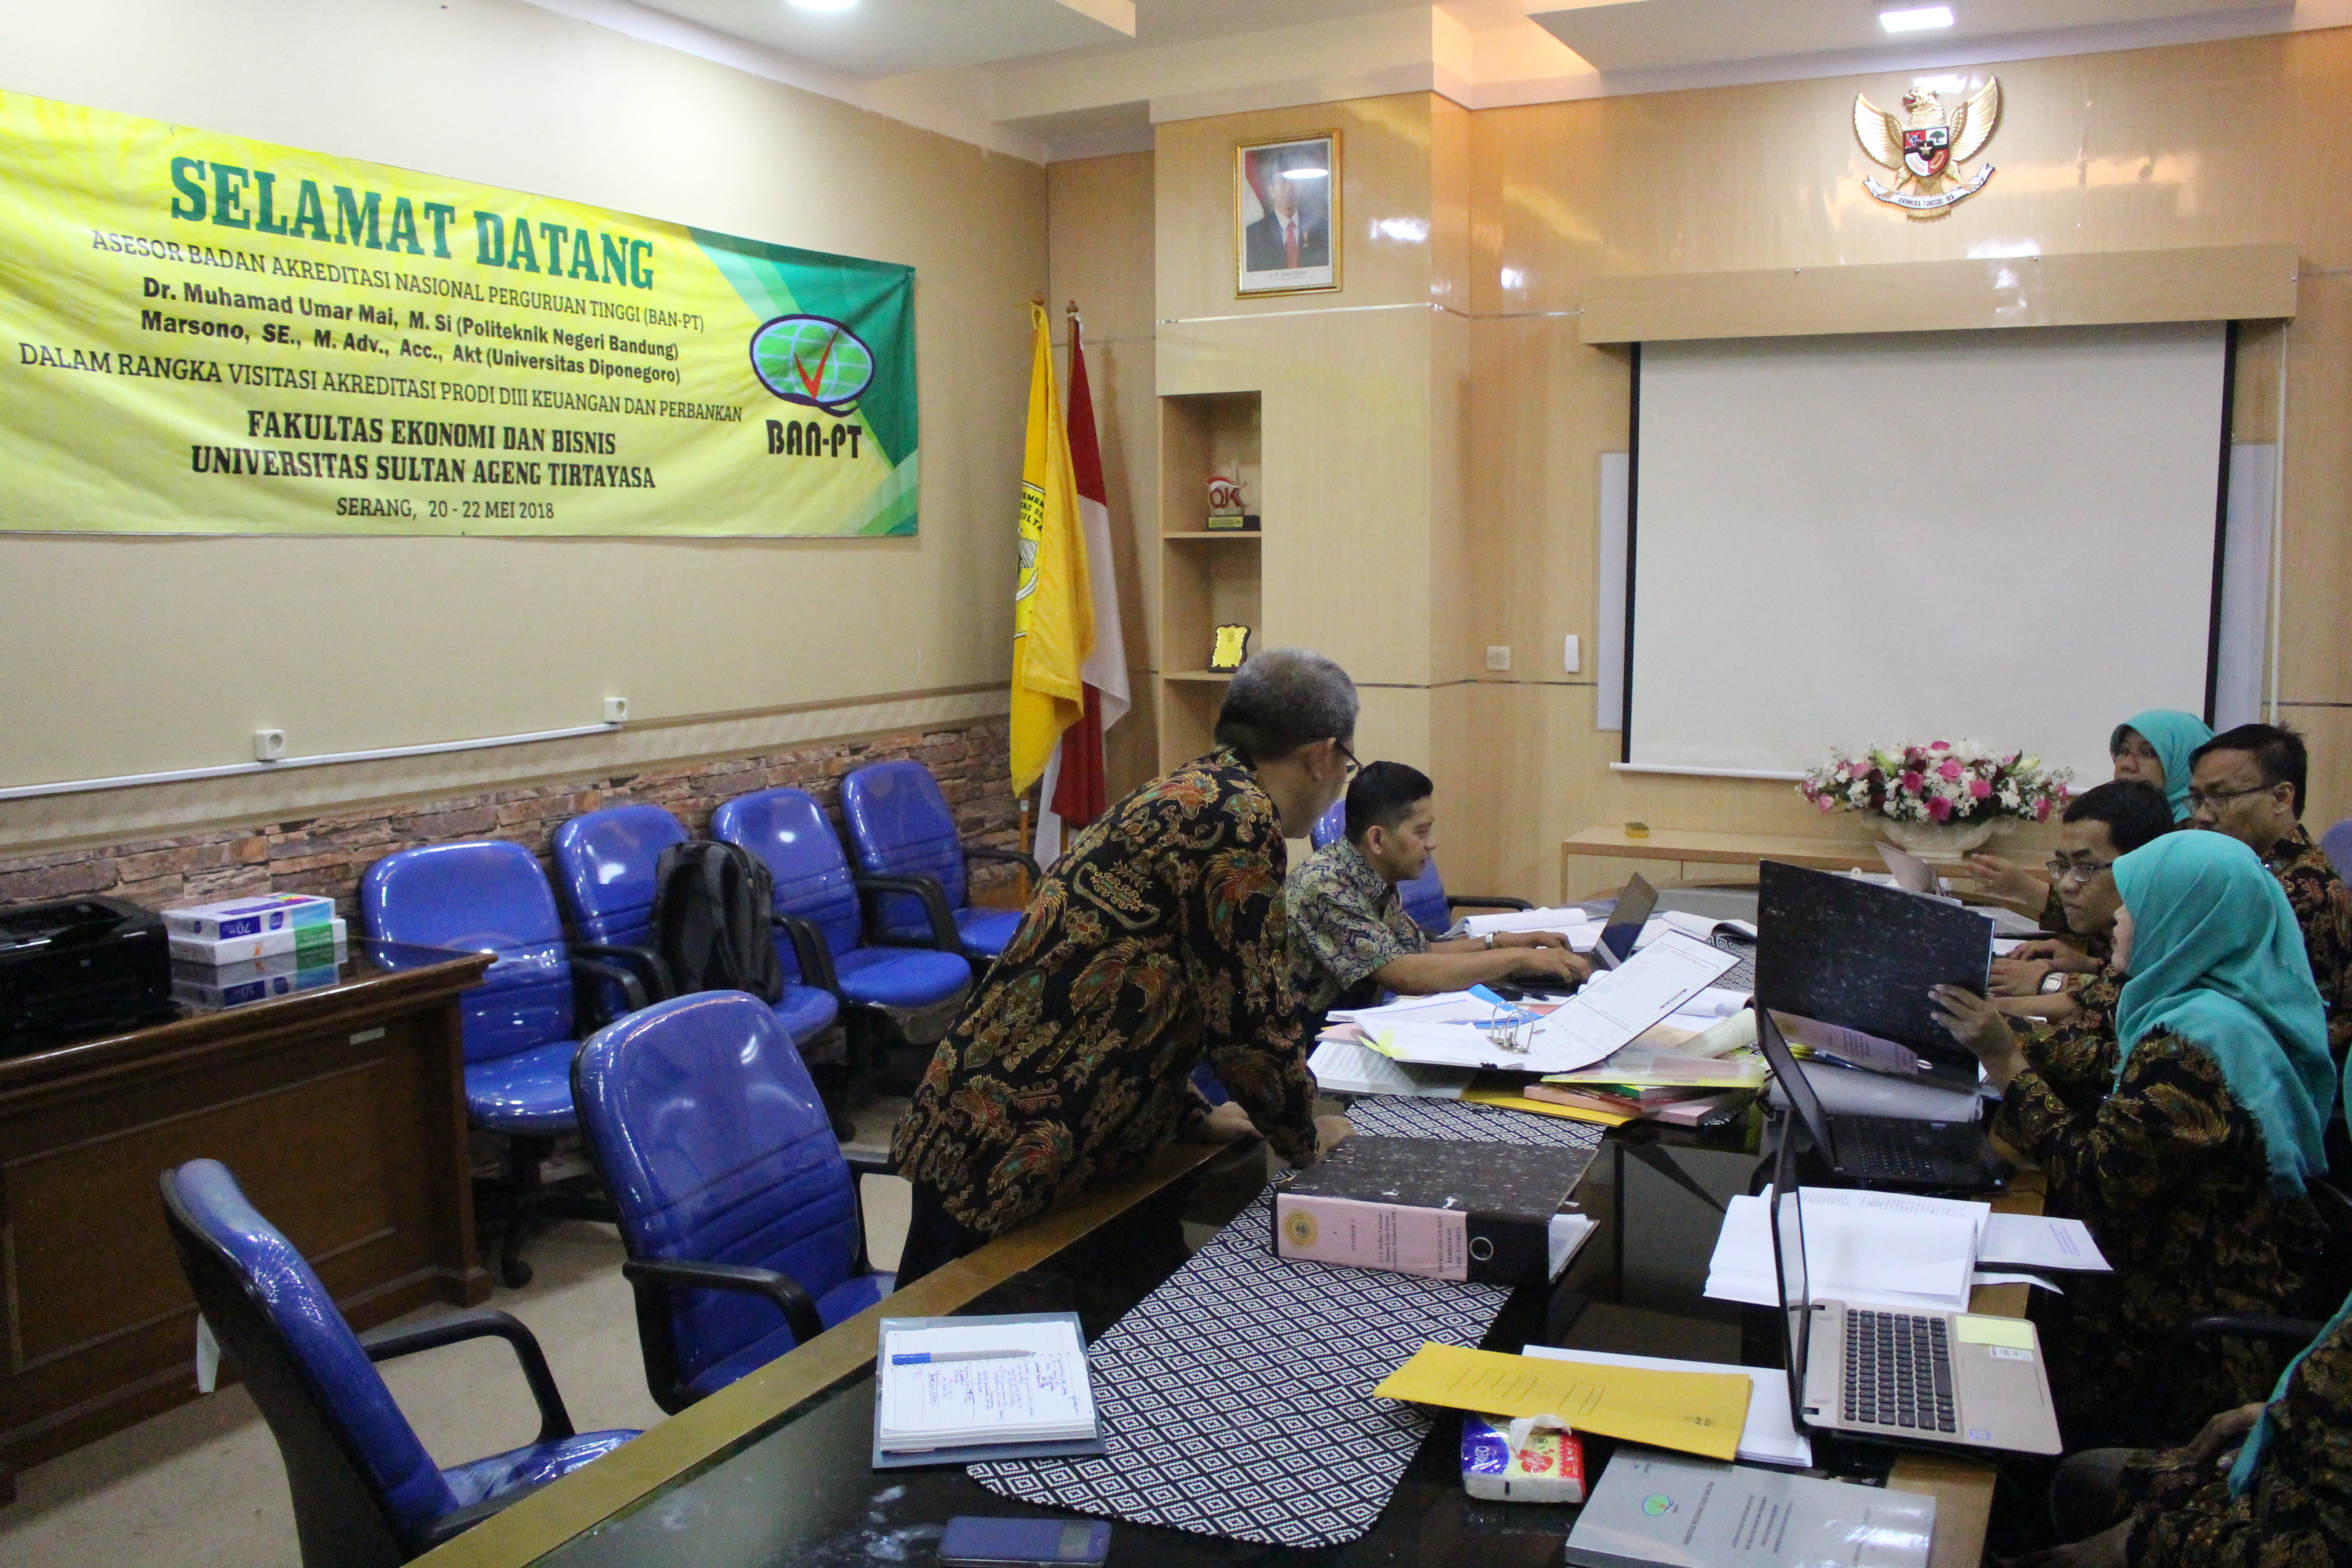 2 ASSESSORS OF TIRE PT VISIT UNTIRTA FOR REALIZING BANKING FINANCIAL PRODUCT